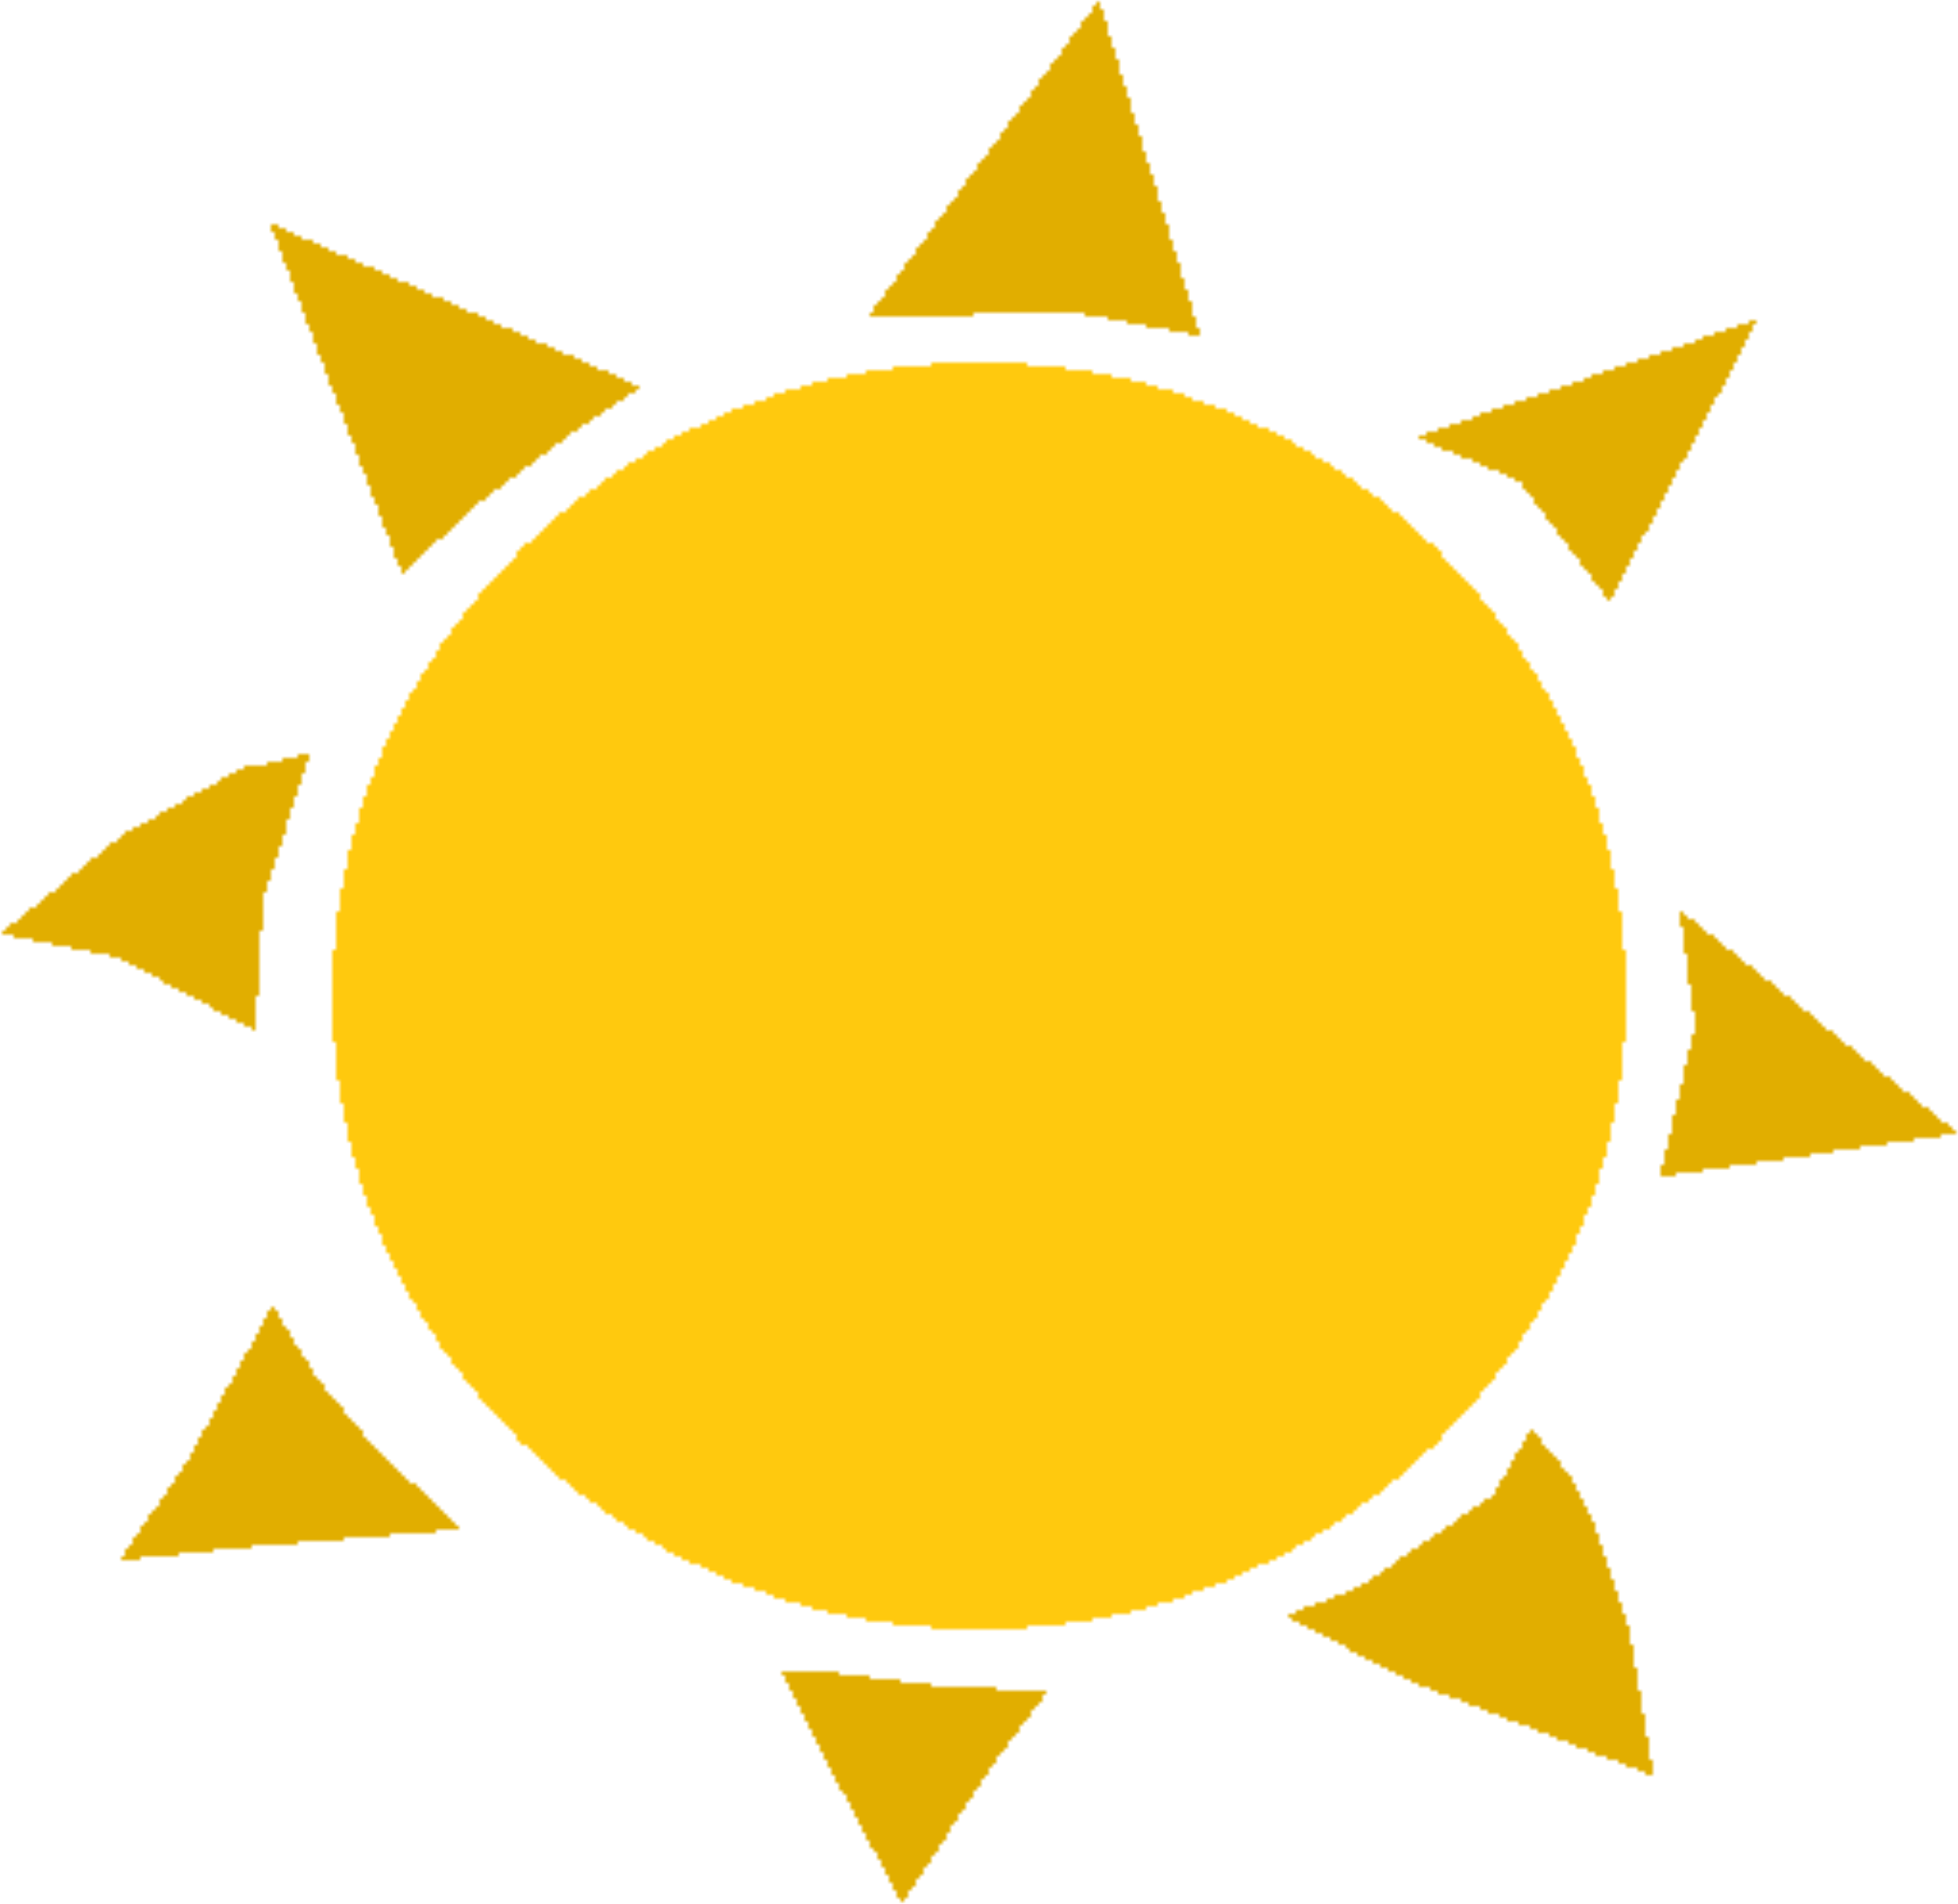 HQ Sun PNG Images, Free SUN Clipart Download - Free Transparent PNG Logos